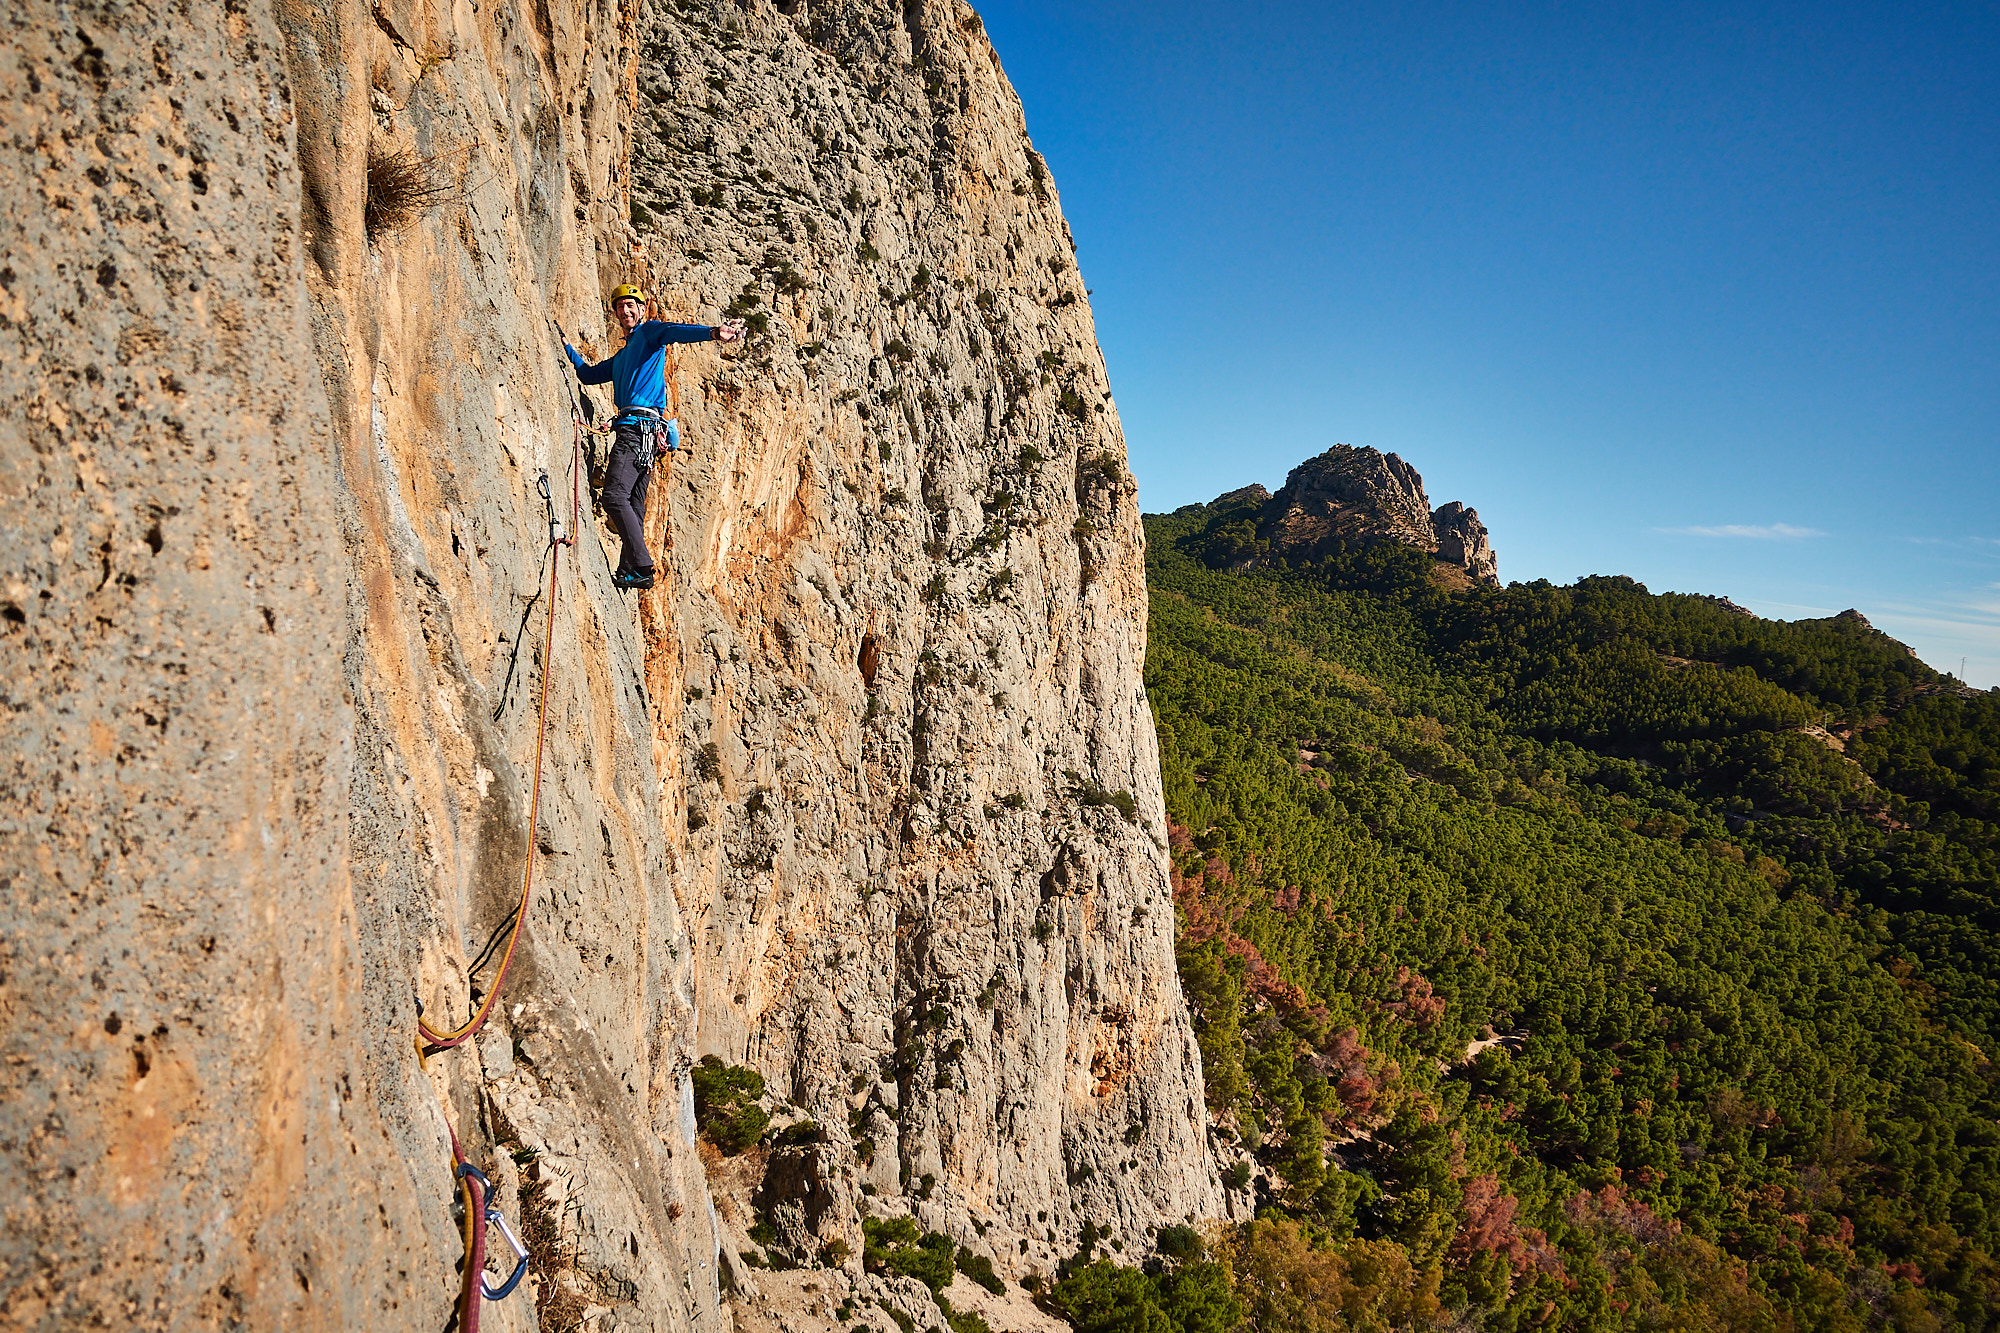 A climber sport climbing on the fifth pitch of a route called Amptrax on a limestone cliff in southern Spain with blue sky above and green trees below